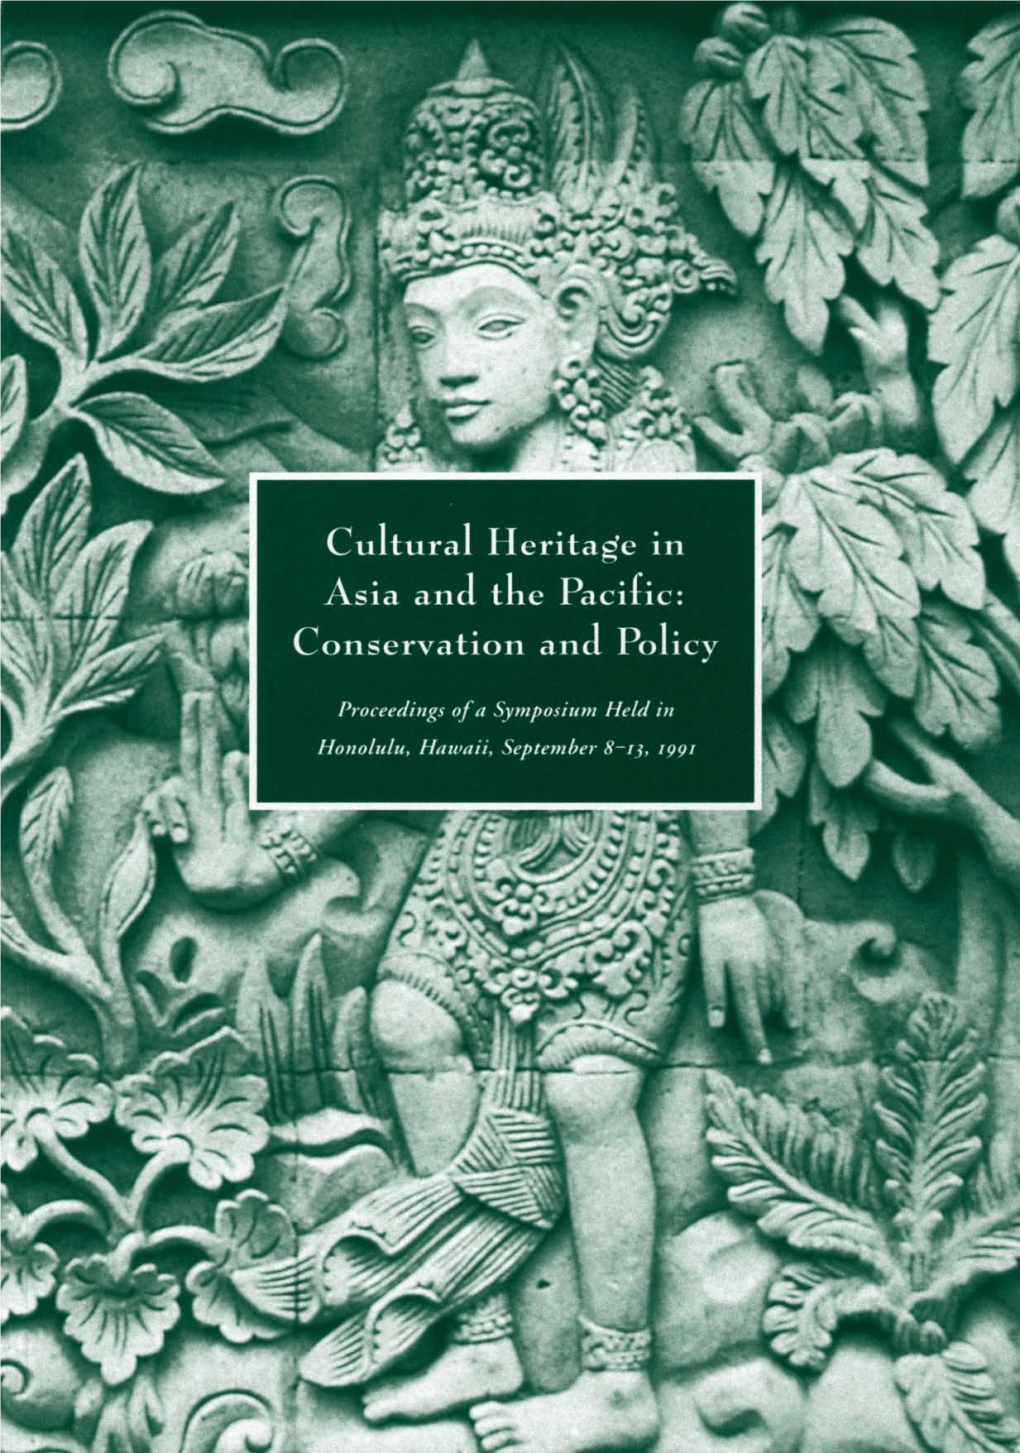 Cultural Heritage in Asia and the Pacific: Conservation and Policy